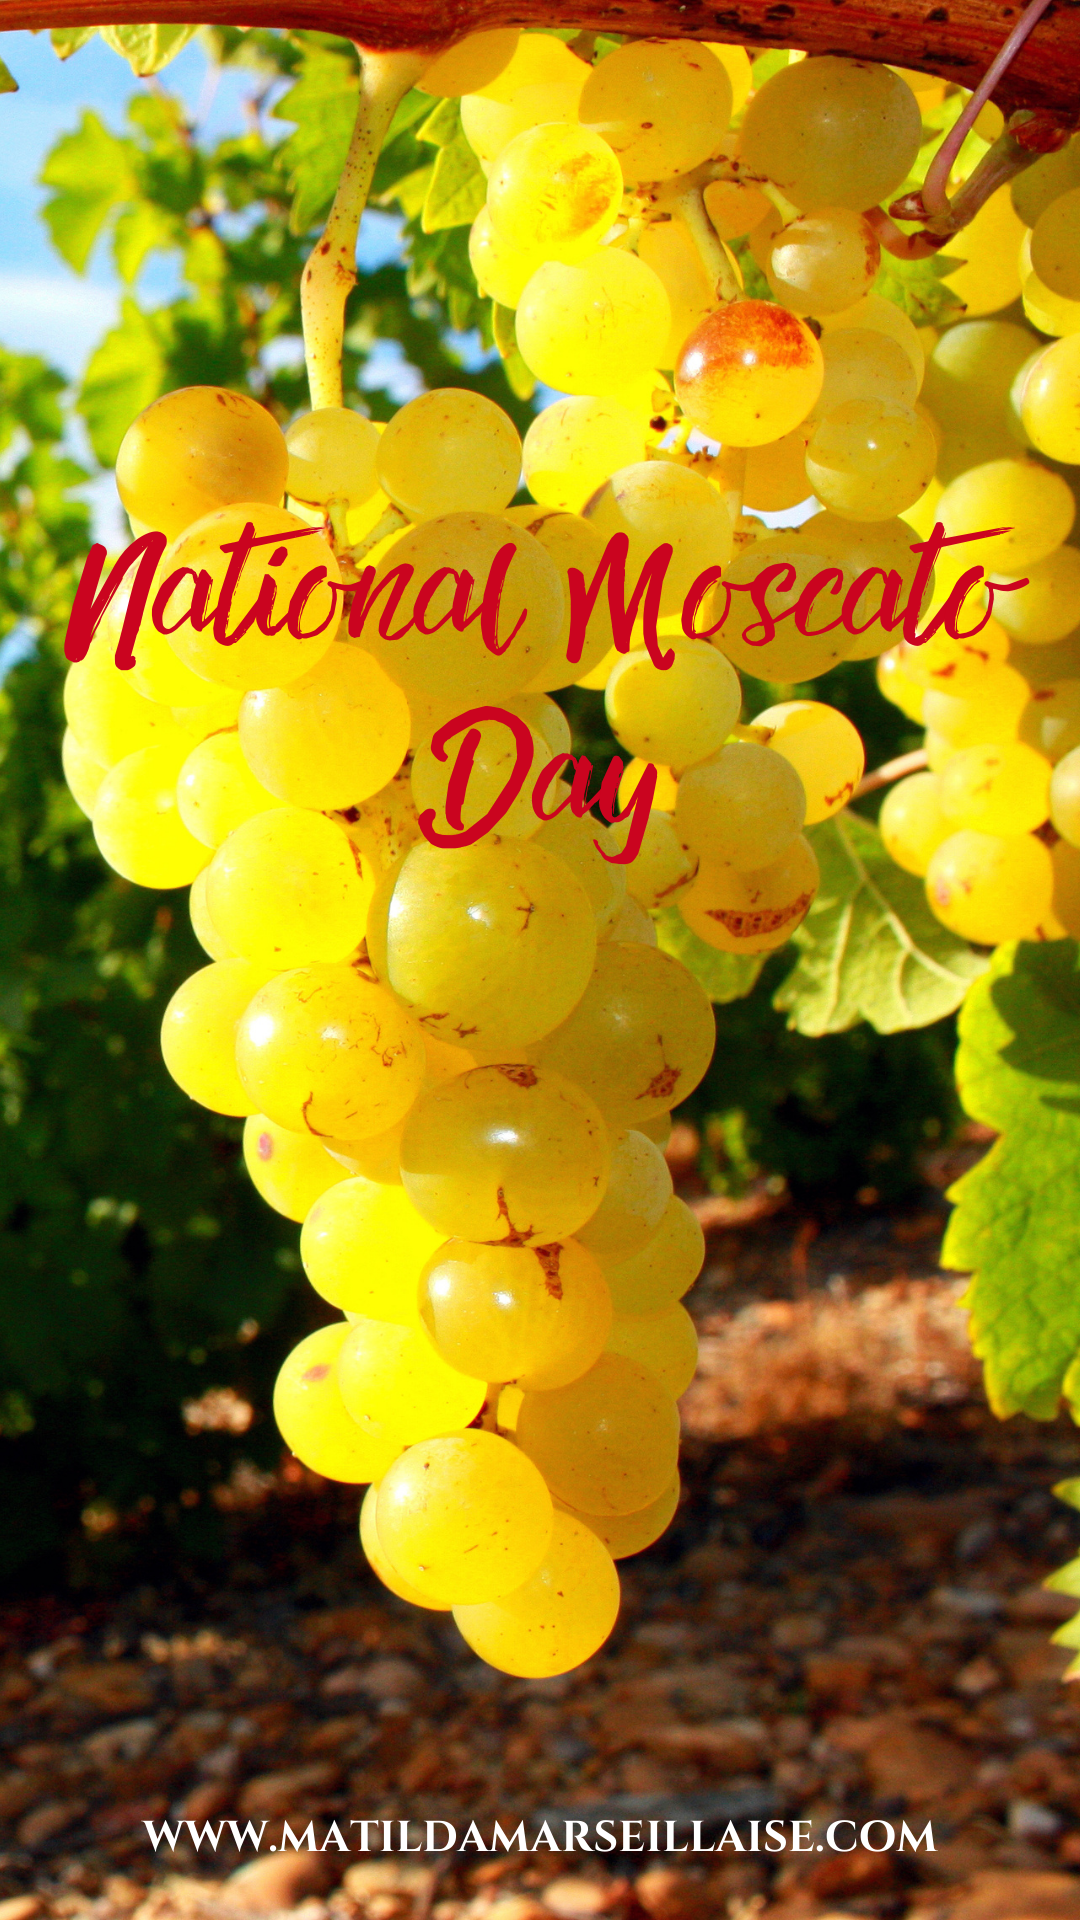 National Moscato Day 2022: 15 facts about Muscat